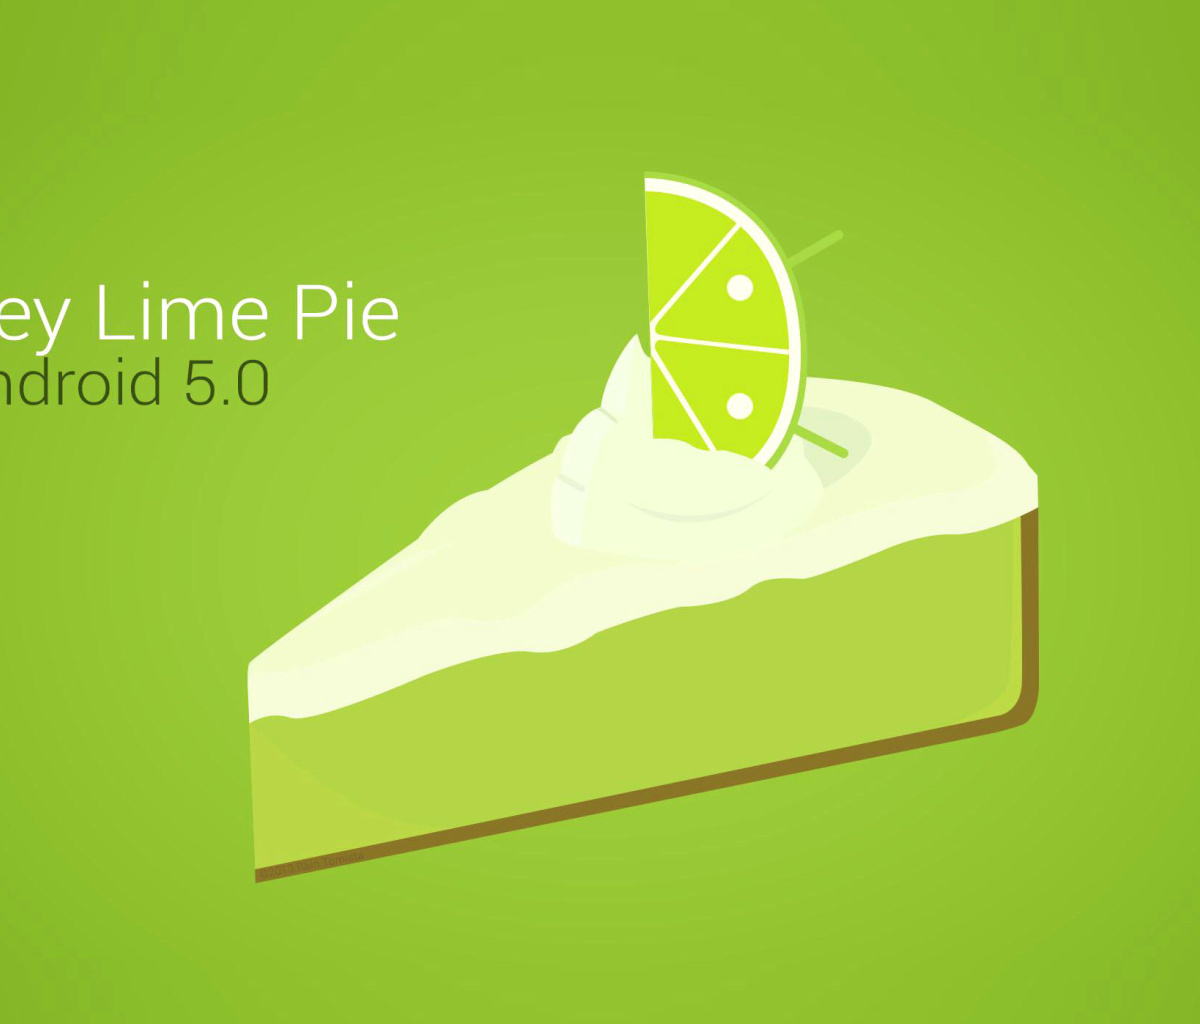 Das Concept Android 5.0 Key Lime Pie Wallpaper 1200x1024